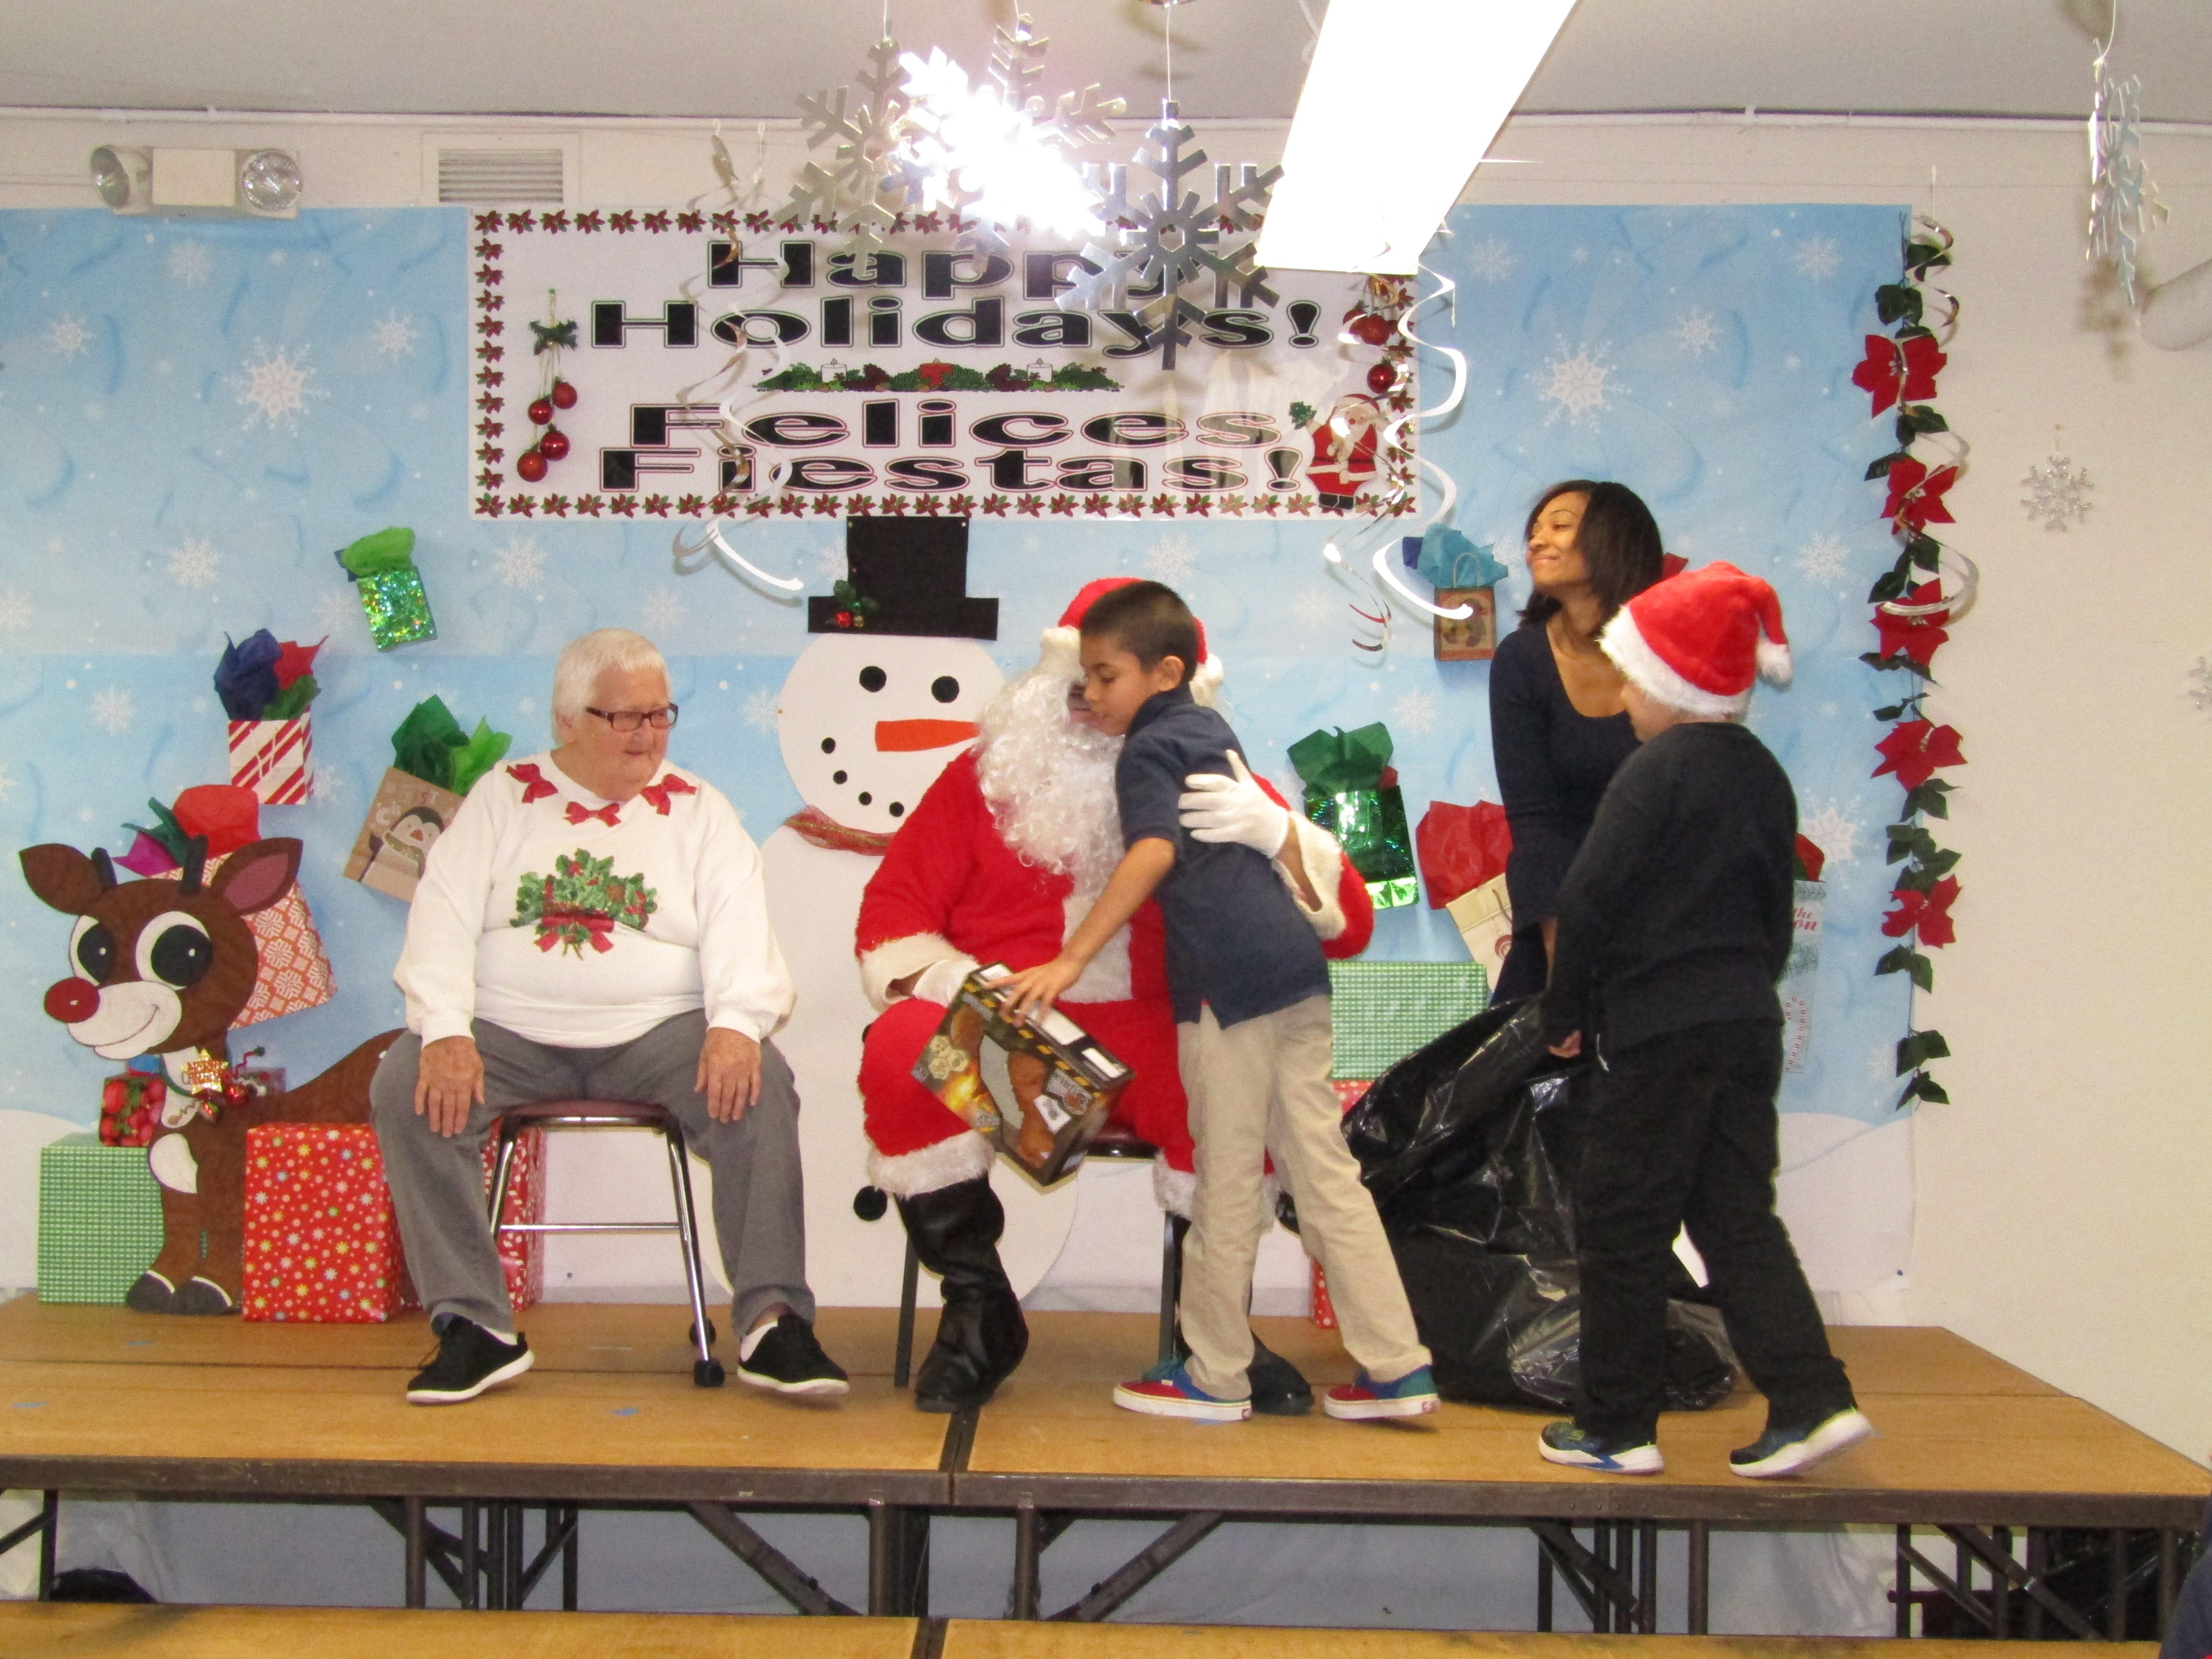 Mr. & Mrs. Claus handing out gifts to male student on stage as teacher pulls gift from bag